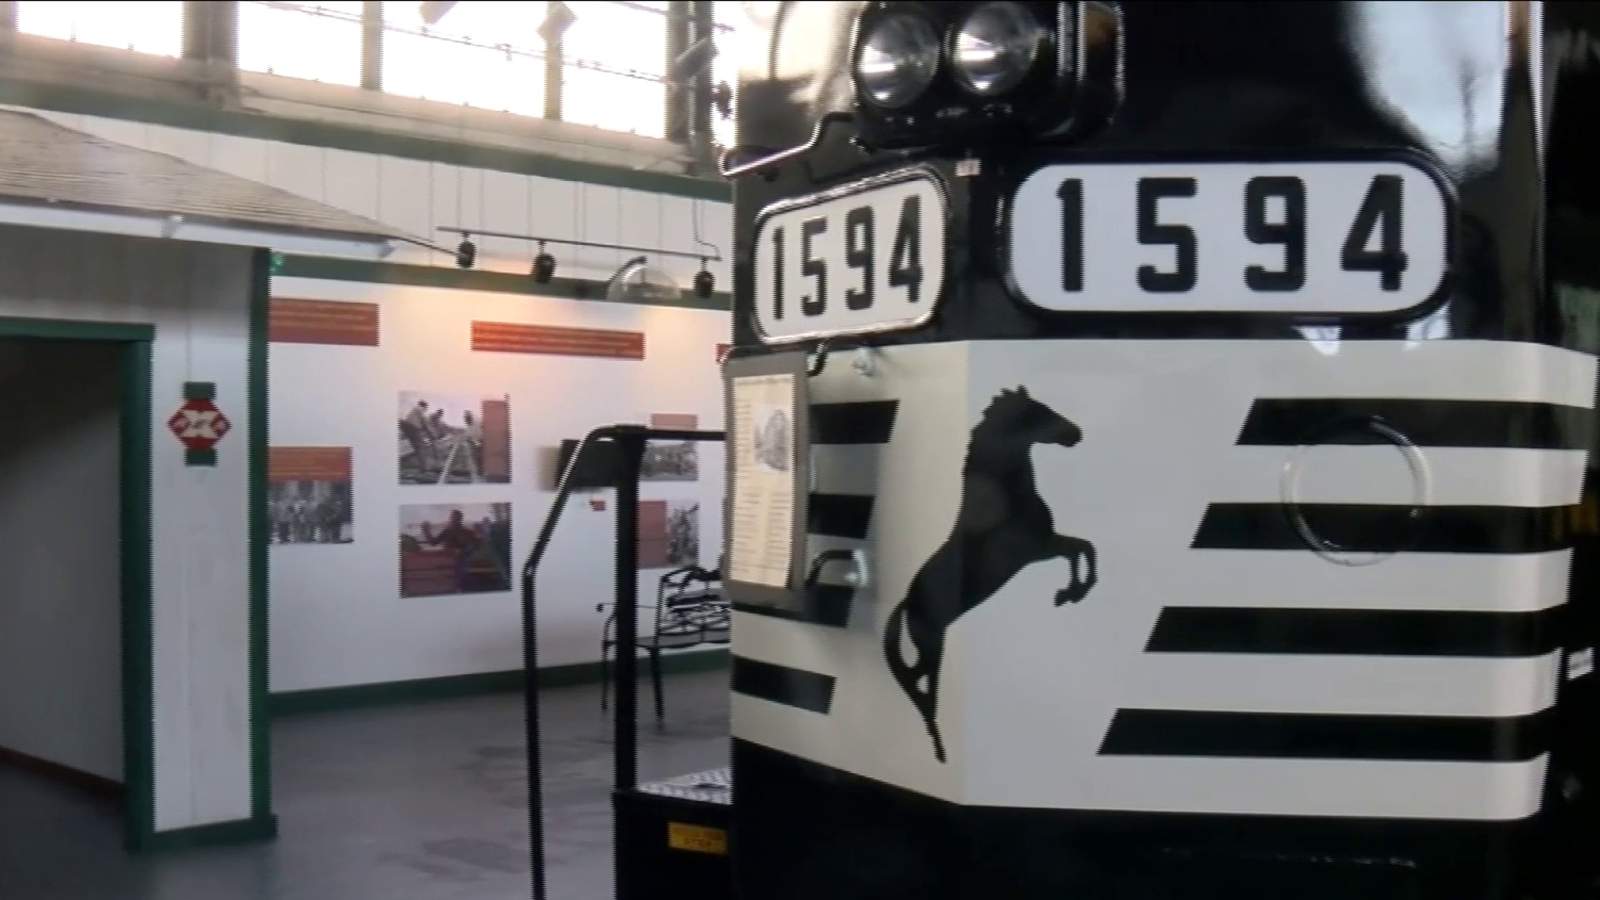 Virginia Museum of Transportation reopening date pays homage to ‘The Queen of Steam’